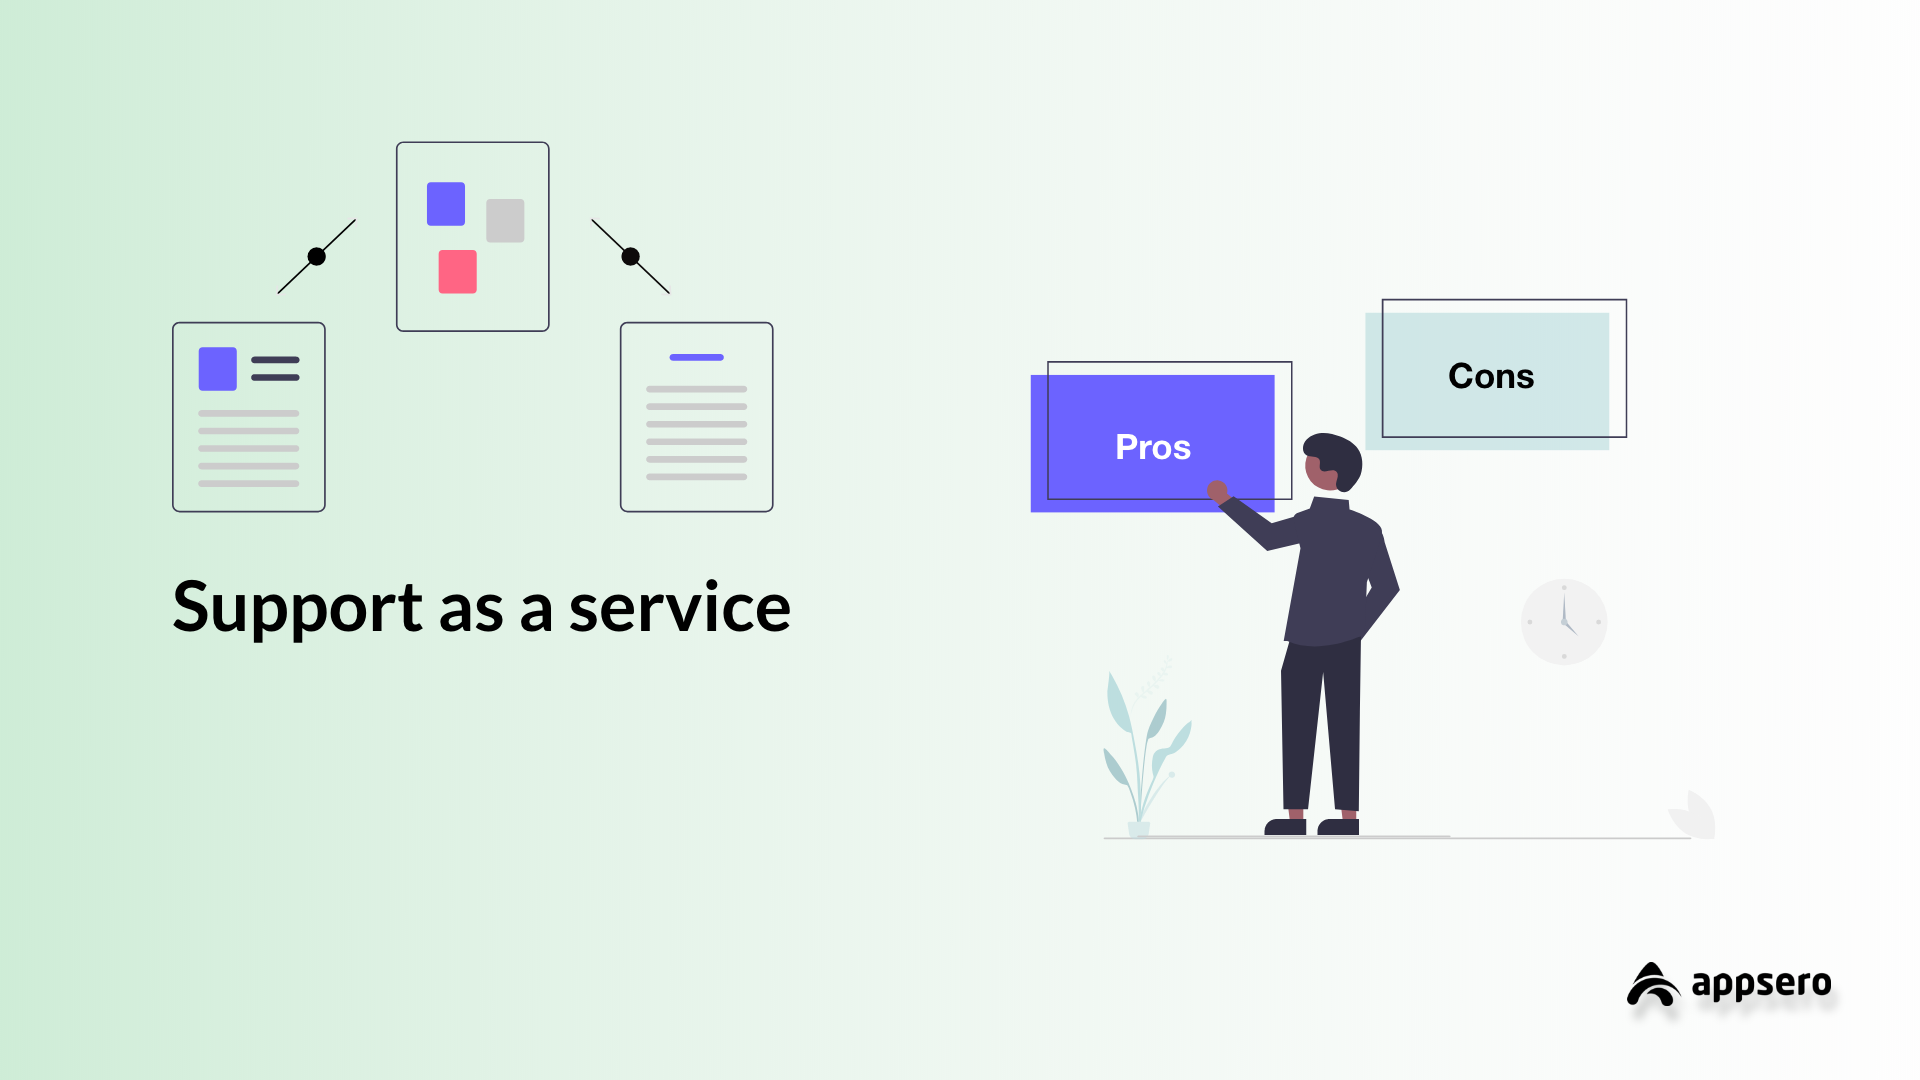 Pros and cons of support as a service